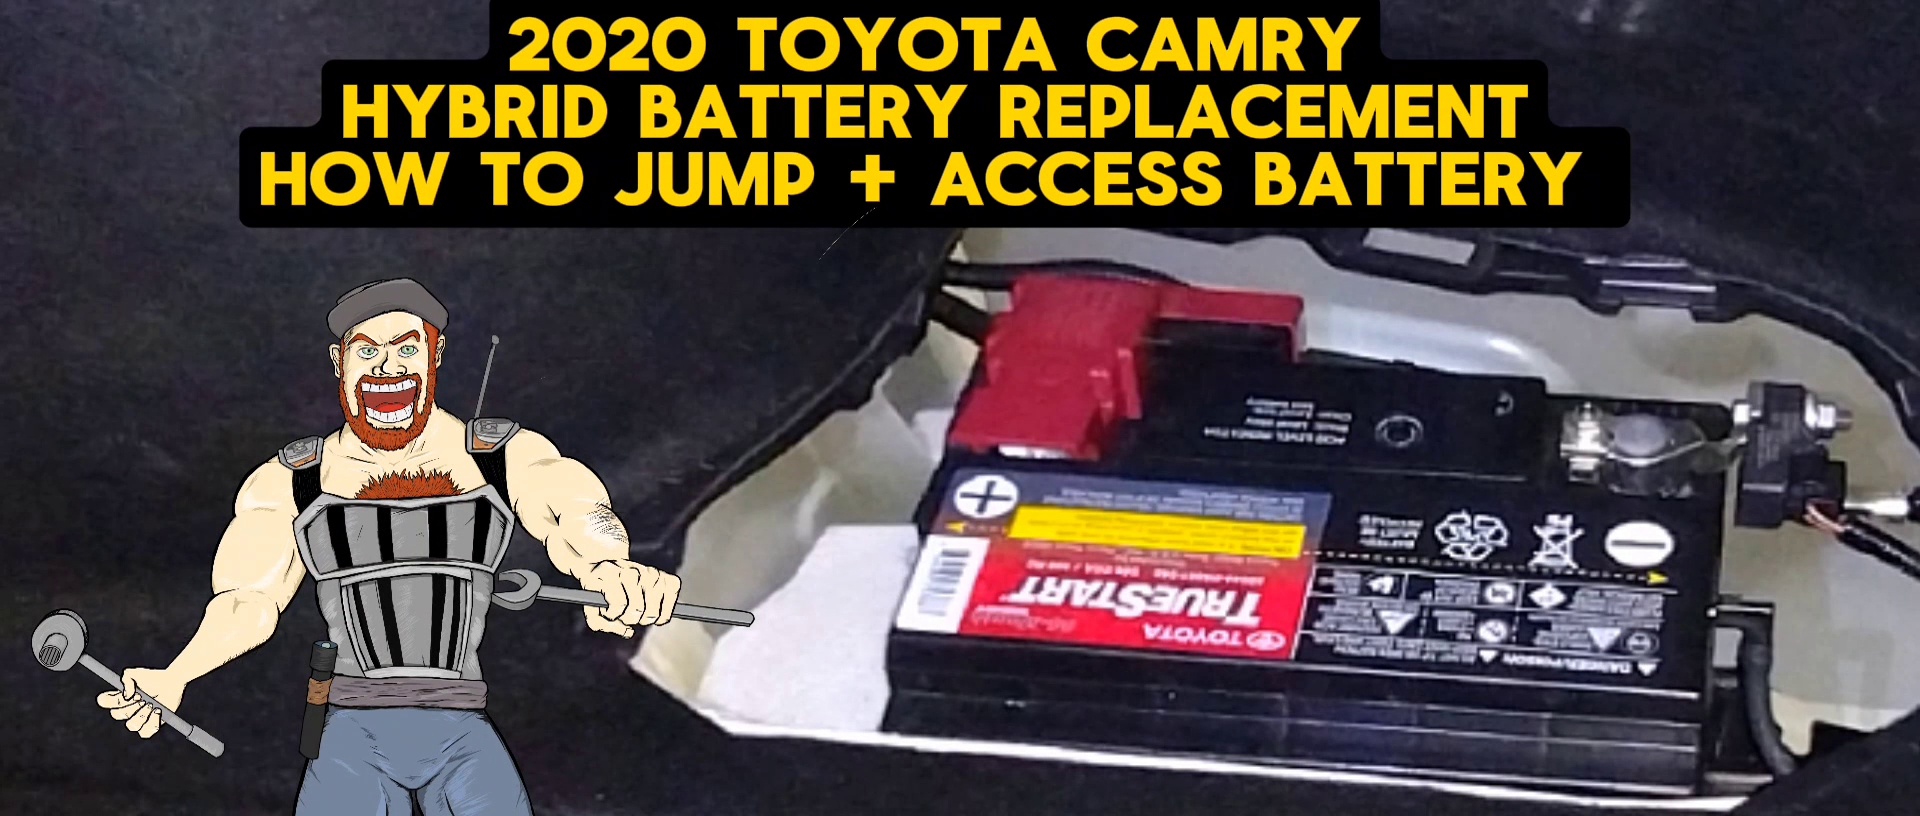 2020 TOYOTA CAMRY HYBRID BATTERY REPLACEMENT + HOW TO JUMP DEAD BATTERY + ACCESS BATTERY